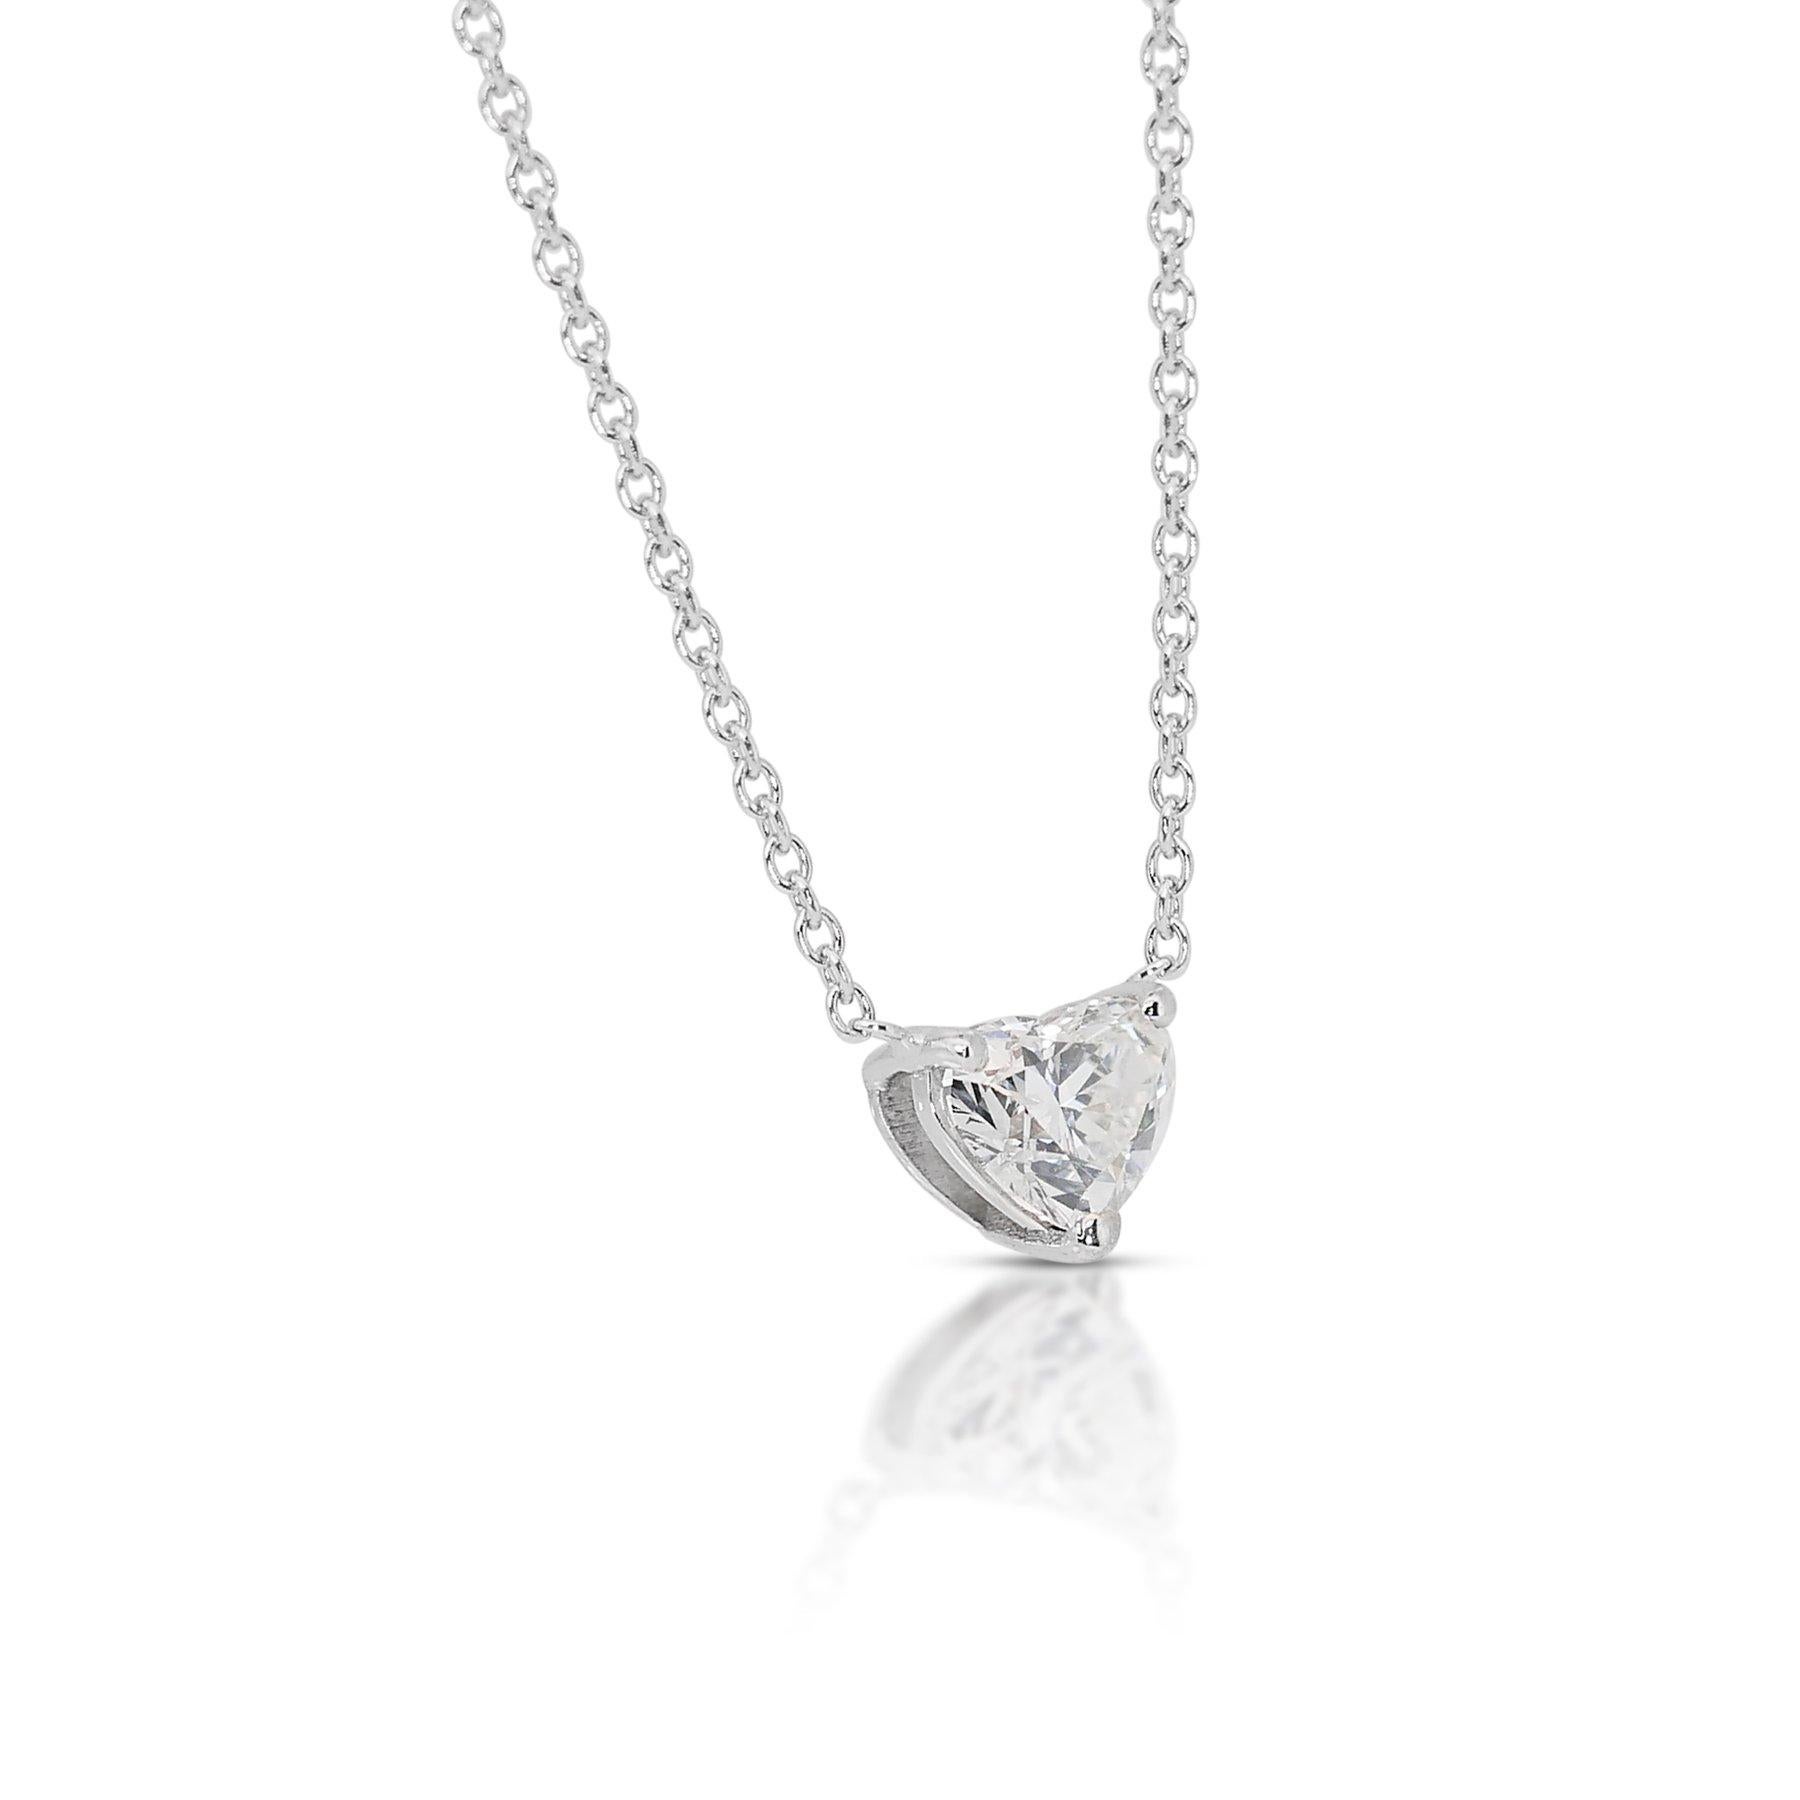 Enchanting 18k White Gold Heart-Shaped Diamond Solitaire Necklace w/0.71 ct  For Sale 1